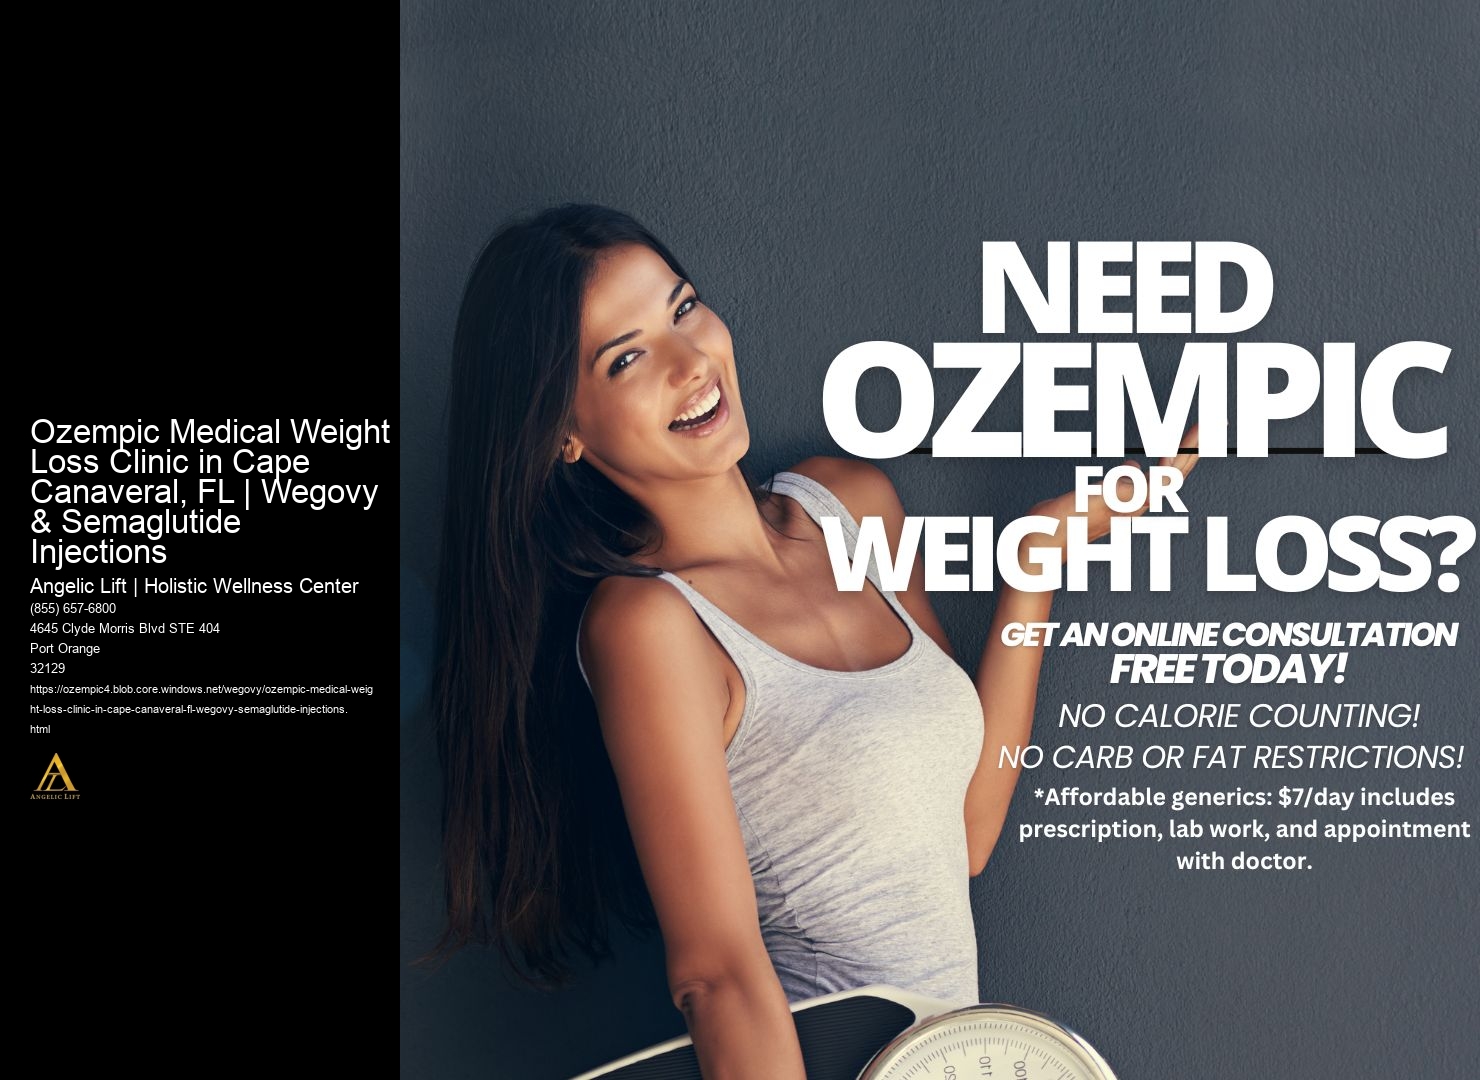 Ozempic Medical Weight Loss Clinic in Cape Canaveral, FL | Wegovy & Semaglutide Injections